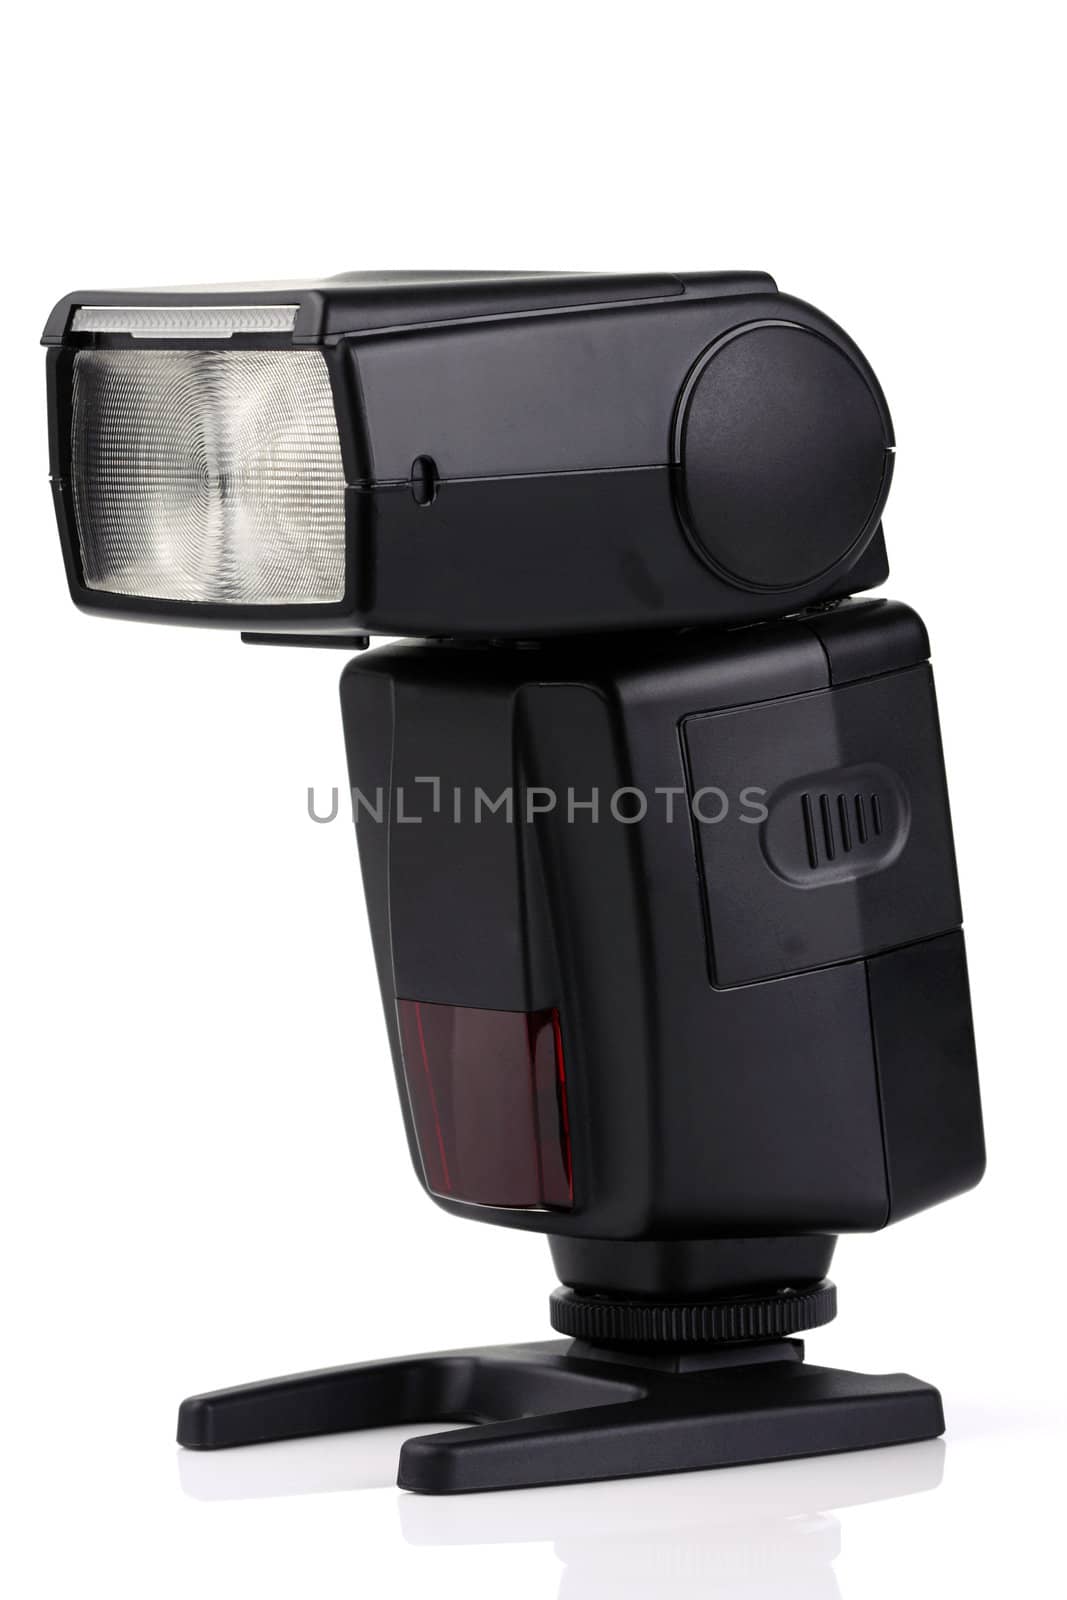 Off camera flash with shoe mount stand.